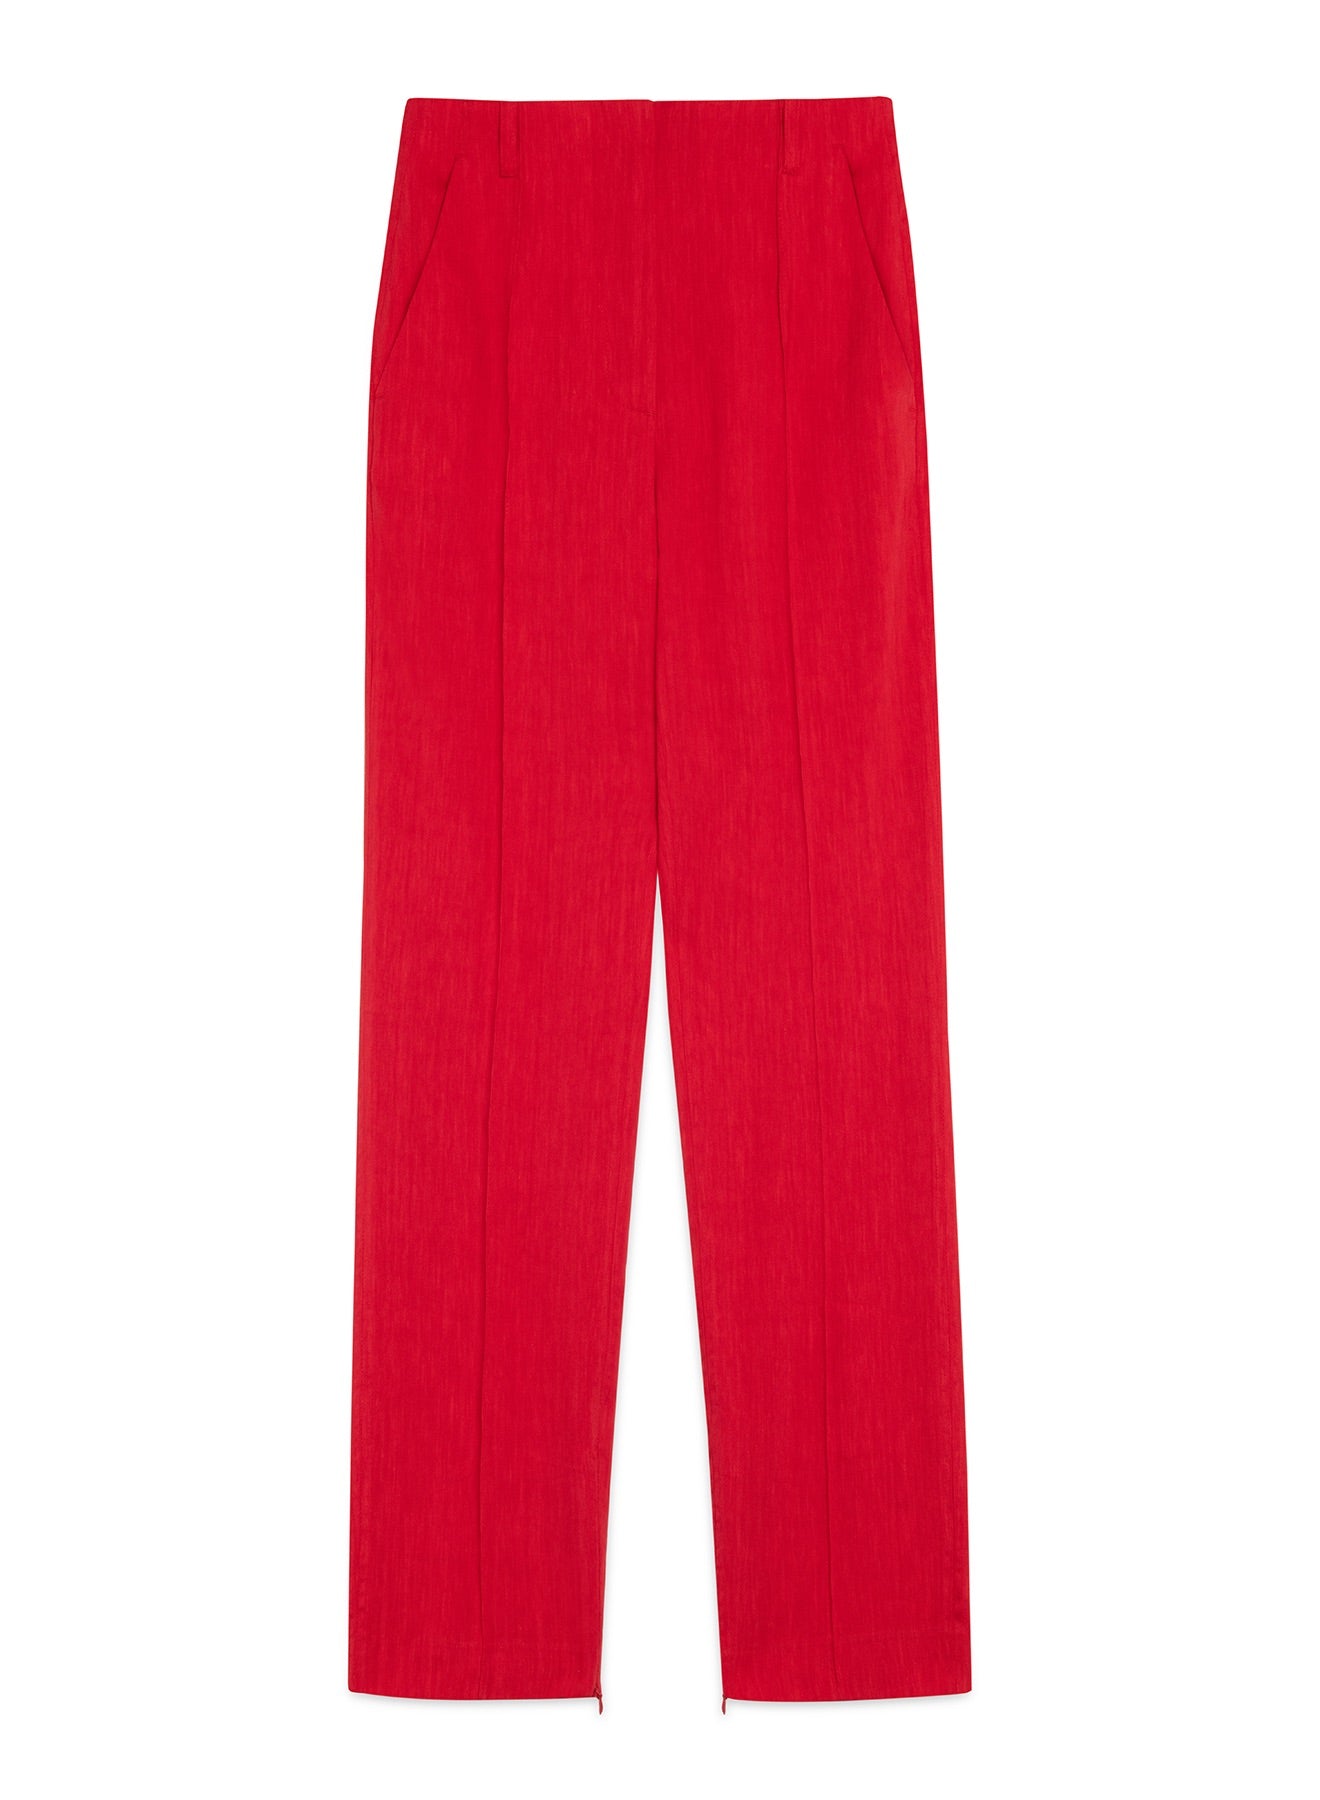 Slim Fit Red Trousers